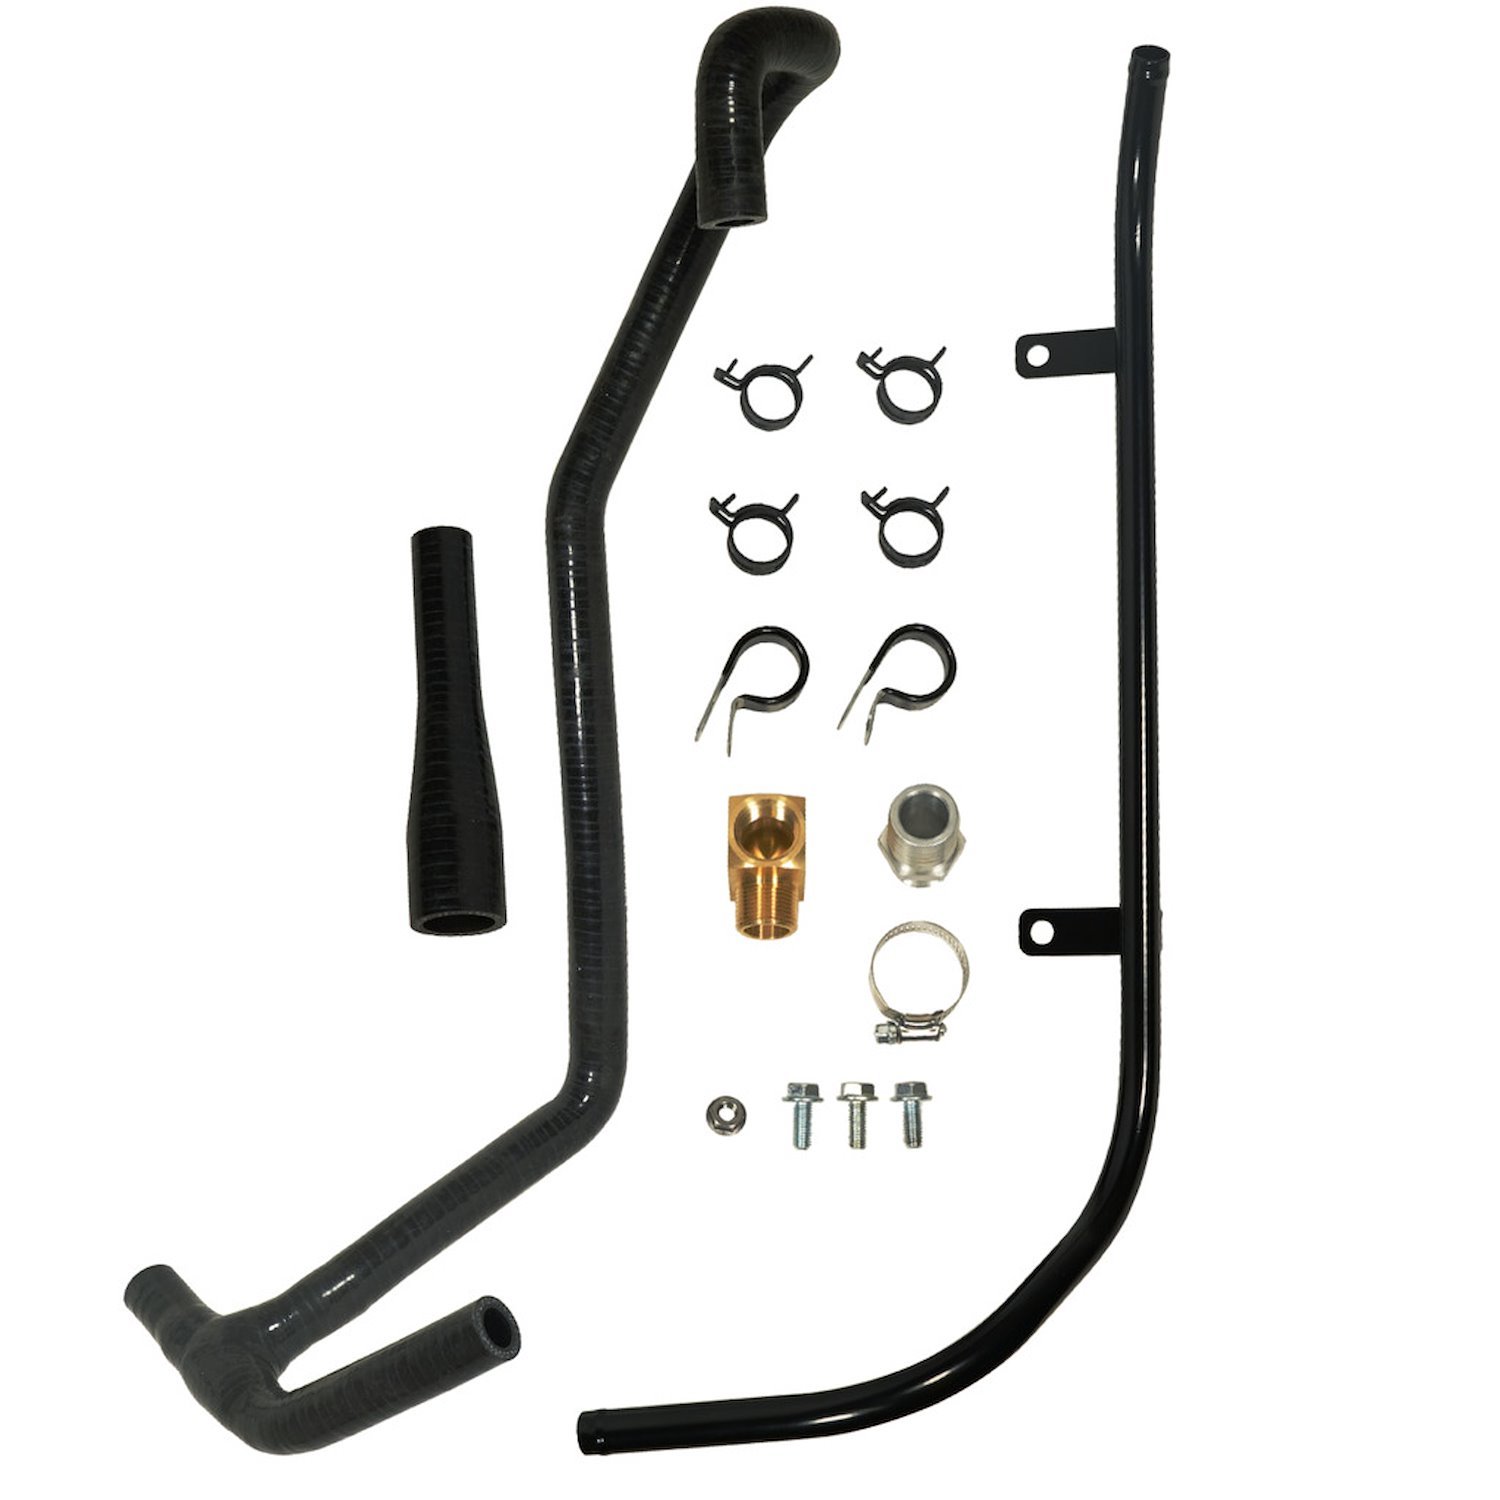 Coolant Tube Relocation Kit for 2003-2005 5.9L Dodge Cummins with Automatic Transmission, Howler Turbo Upgrade